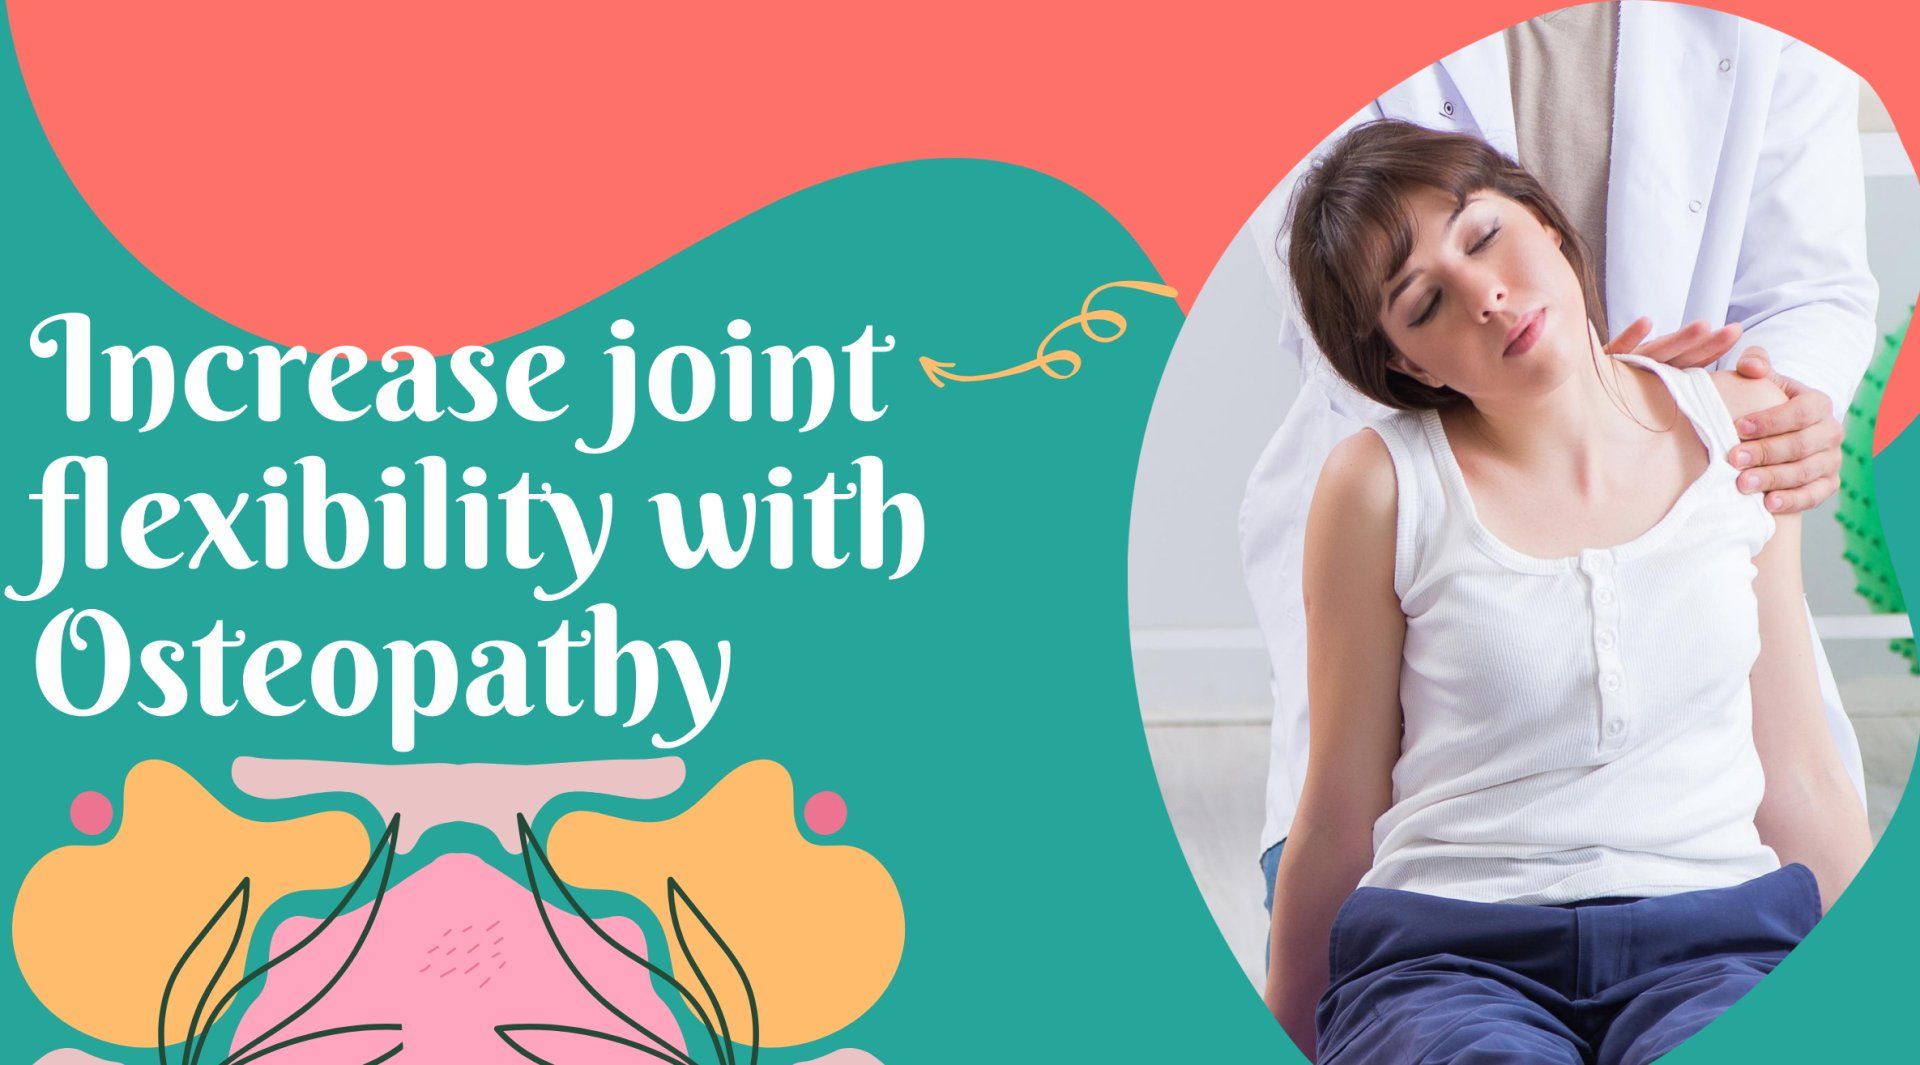 Do you struggle with your flexibility? Were you aware that you could increase joint flexibility with osteopathy?